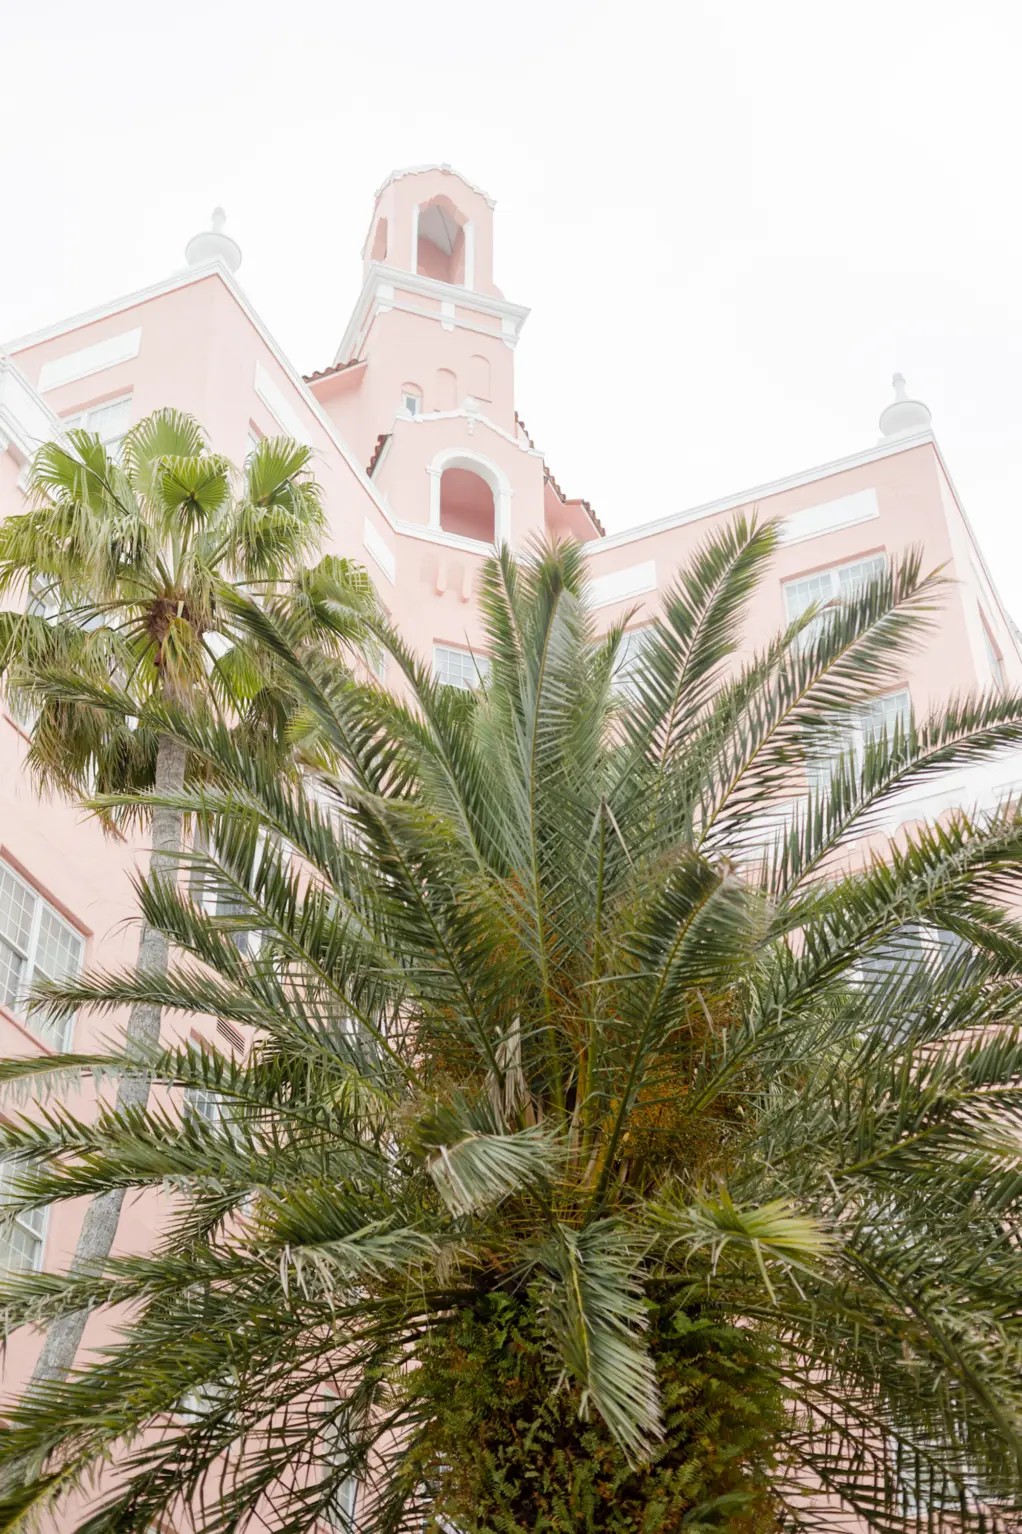 The Pink Palace | St Pete Beach Wedding Venue The Don CeSar